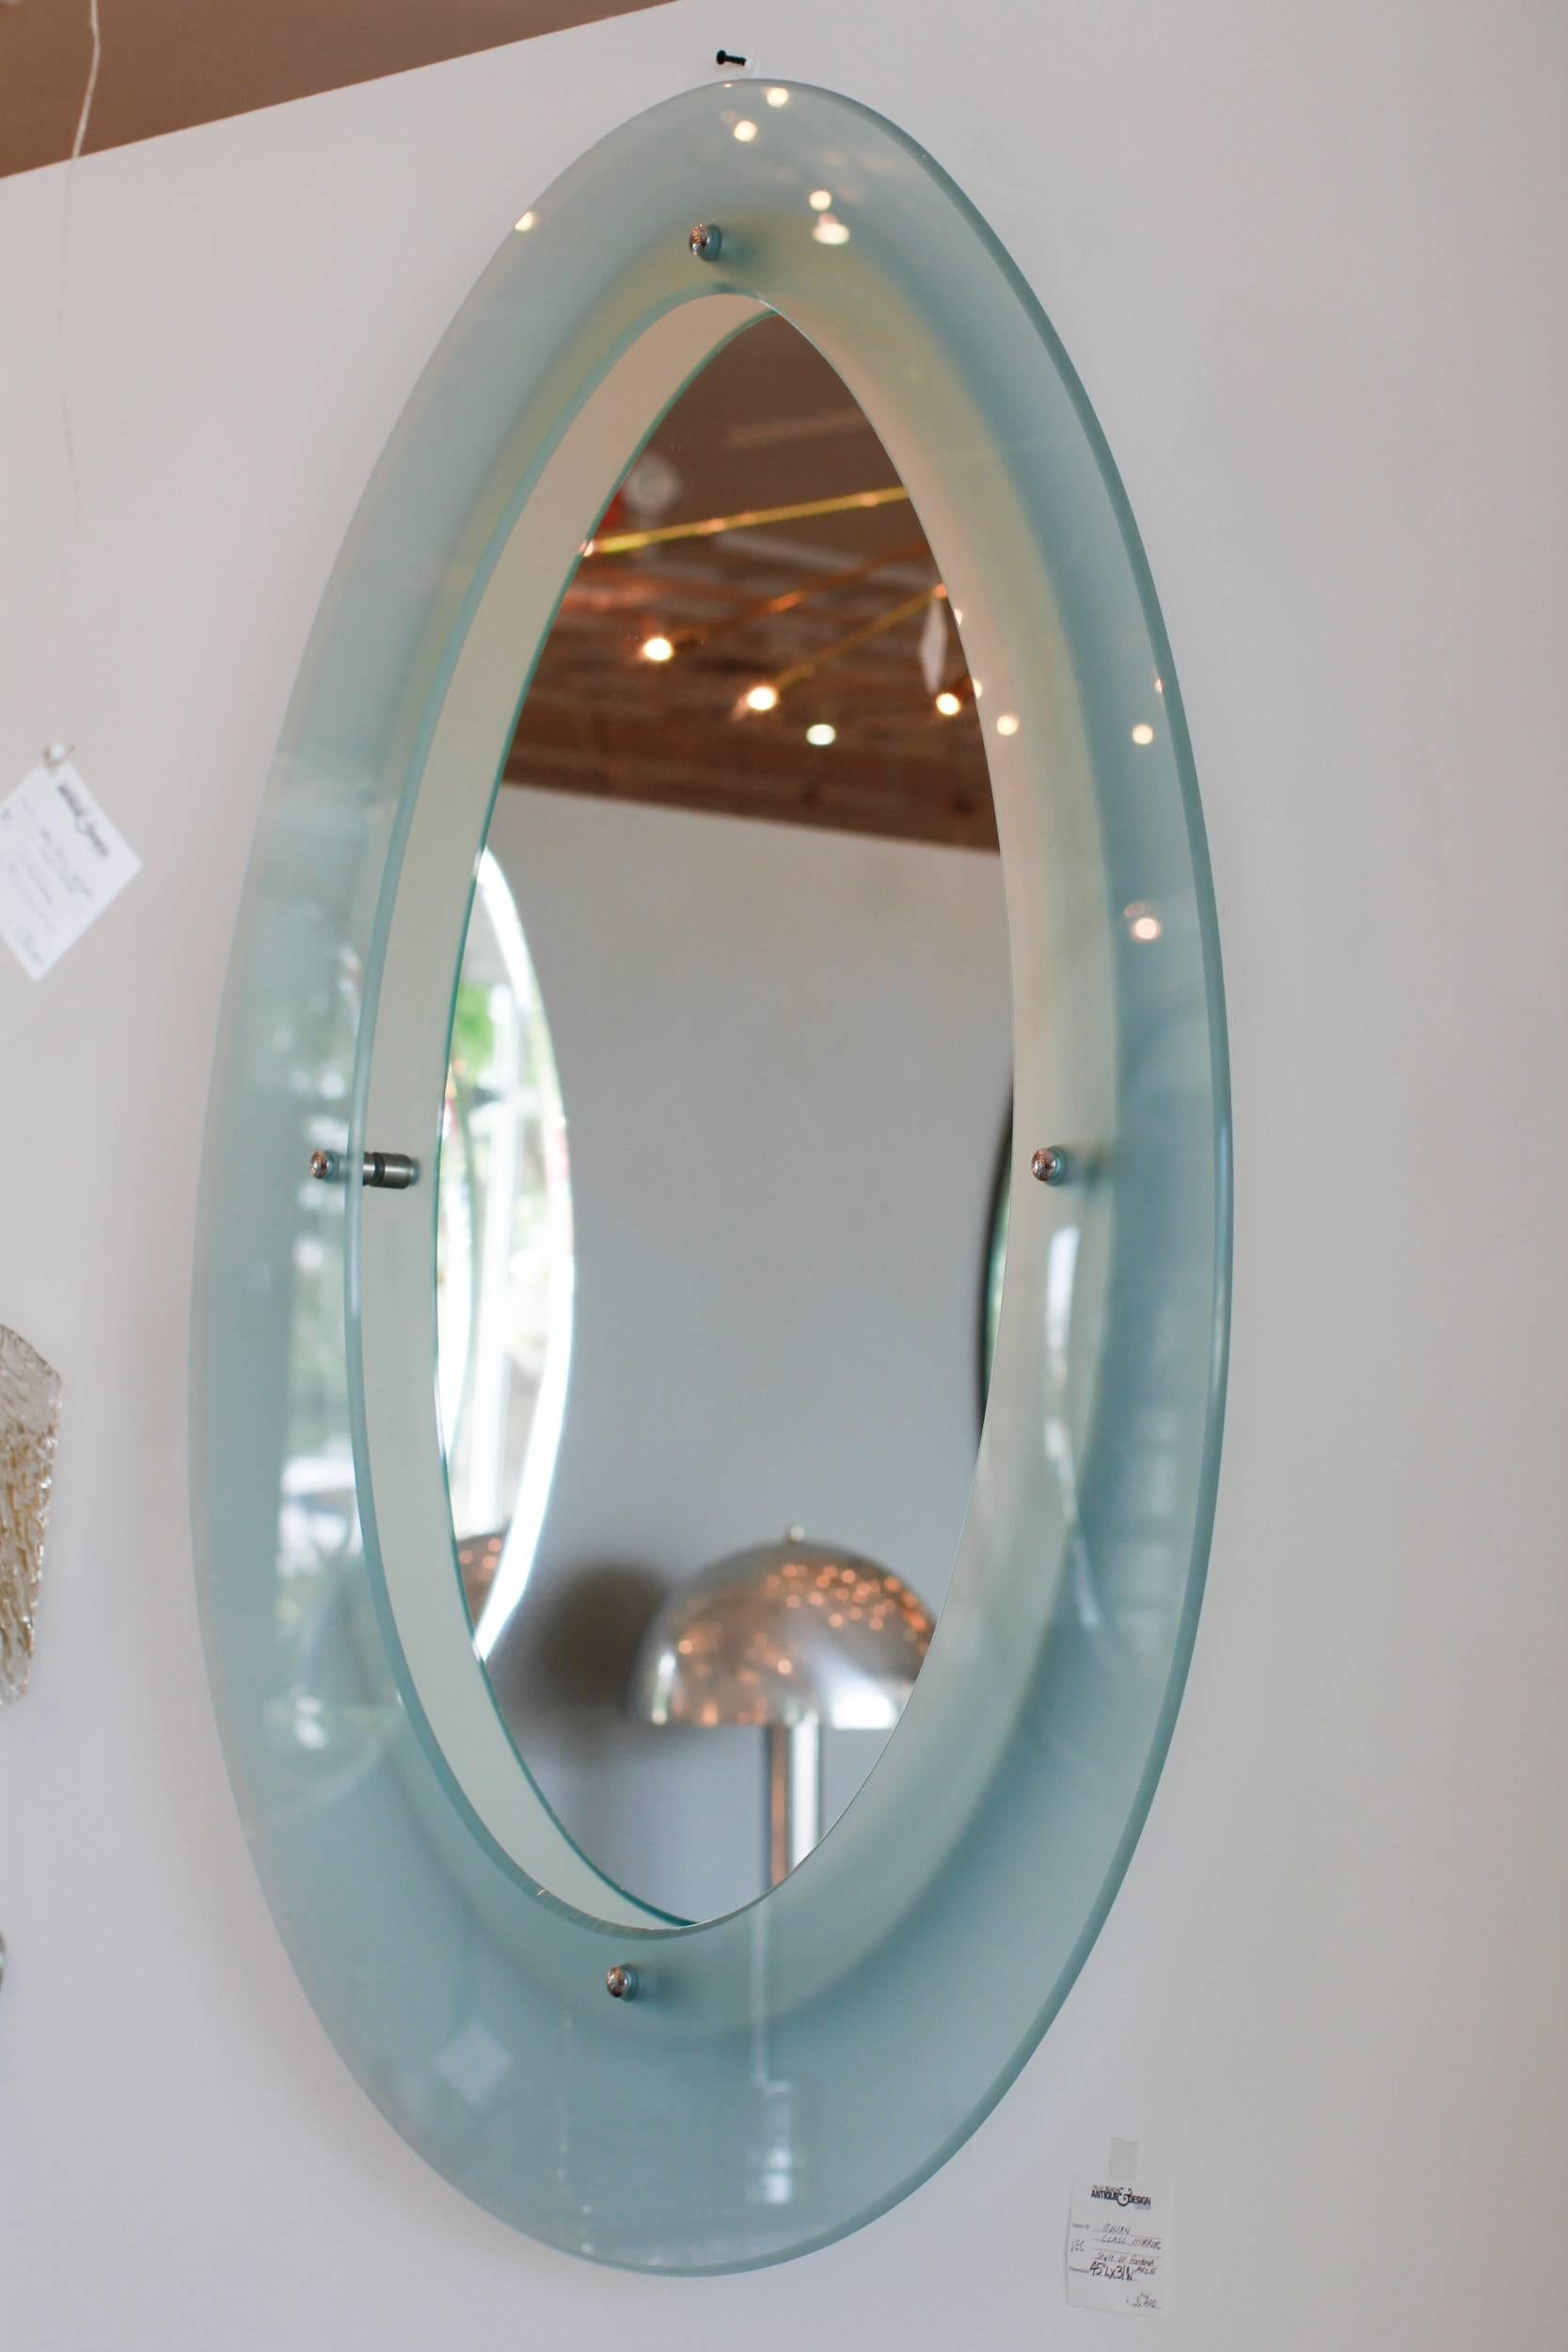 Green glass Italian mirror with chrome details.